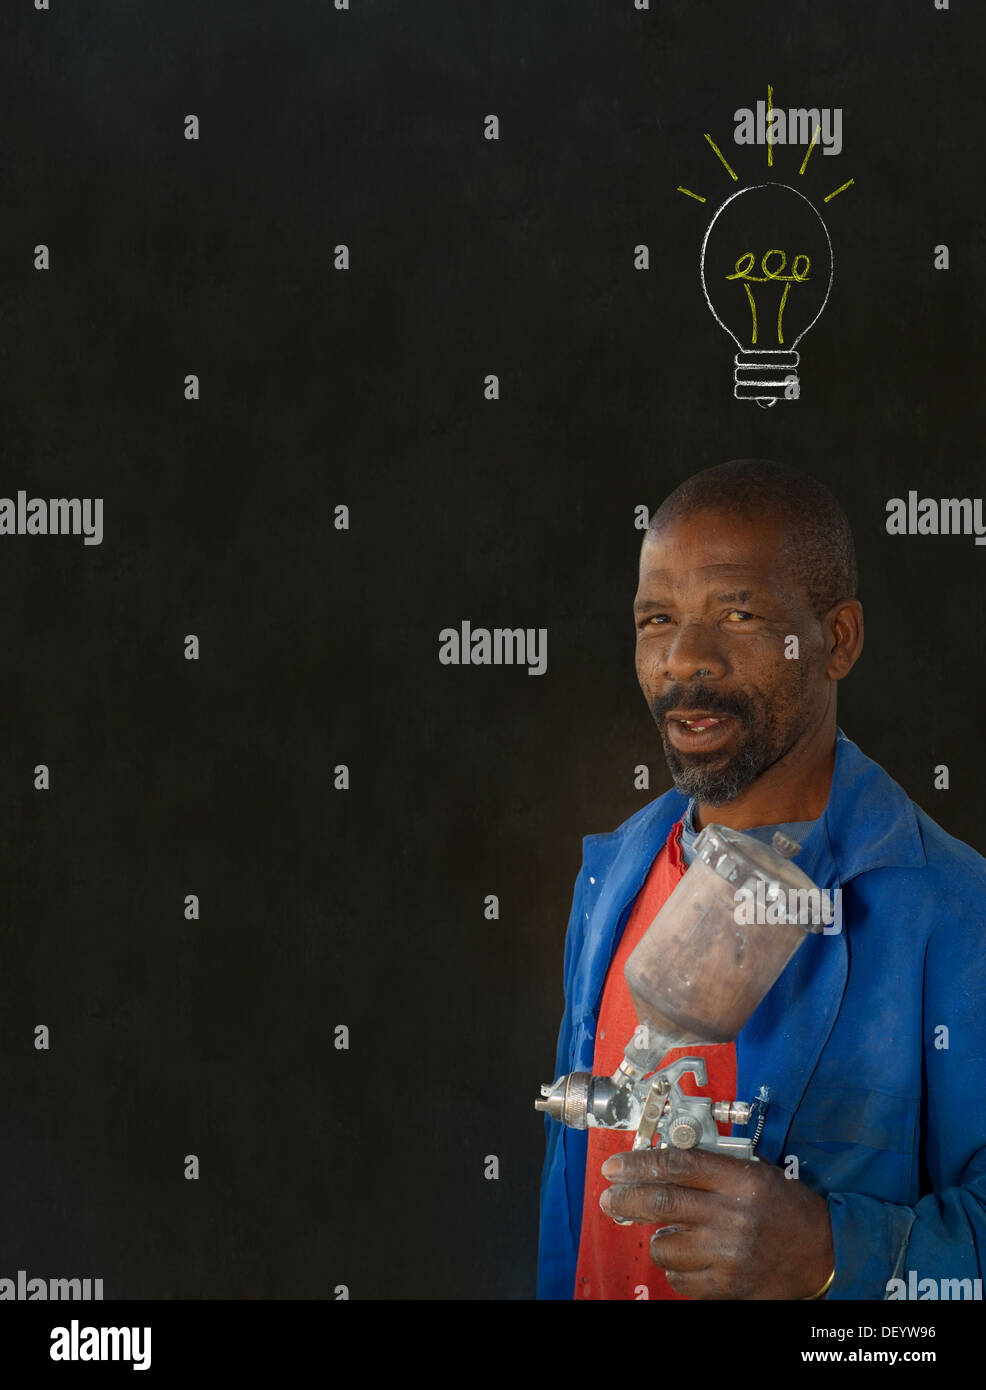 African American black man industrial worker with chalk light bulb on a blackboard background Stock Photo